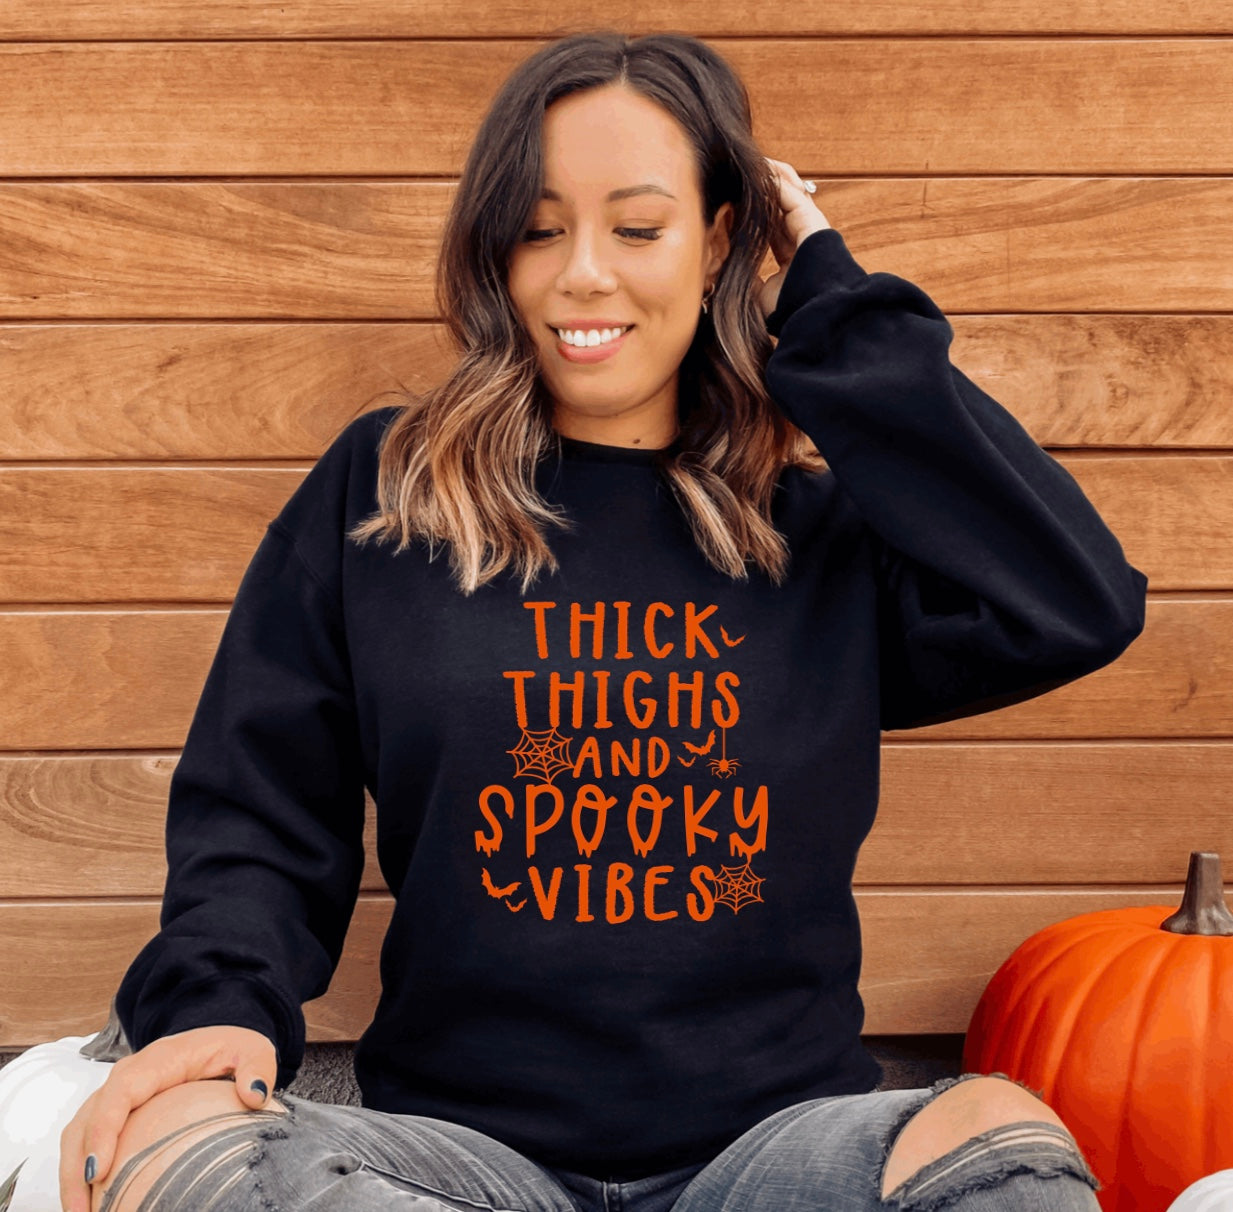 Thick thighs and spooky vibes crew neck sweatshirt 